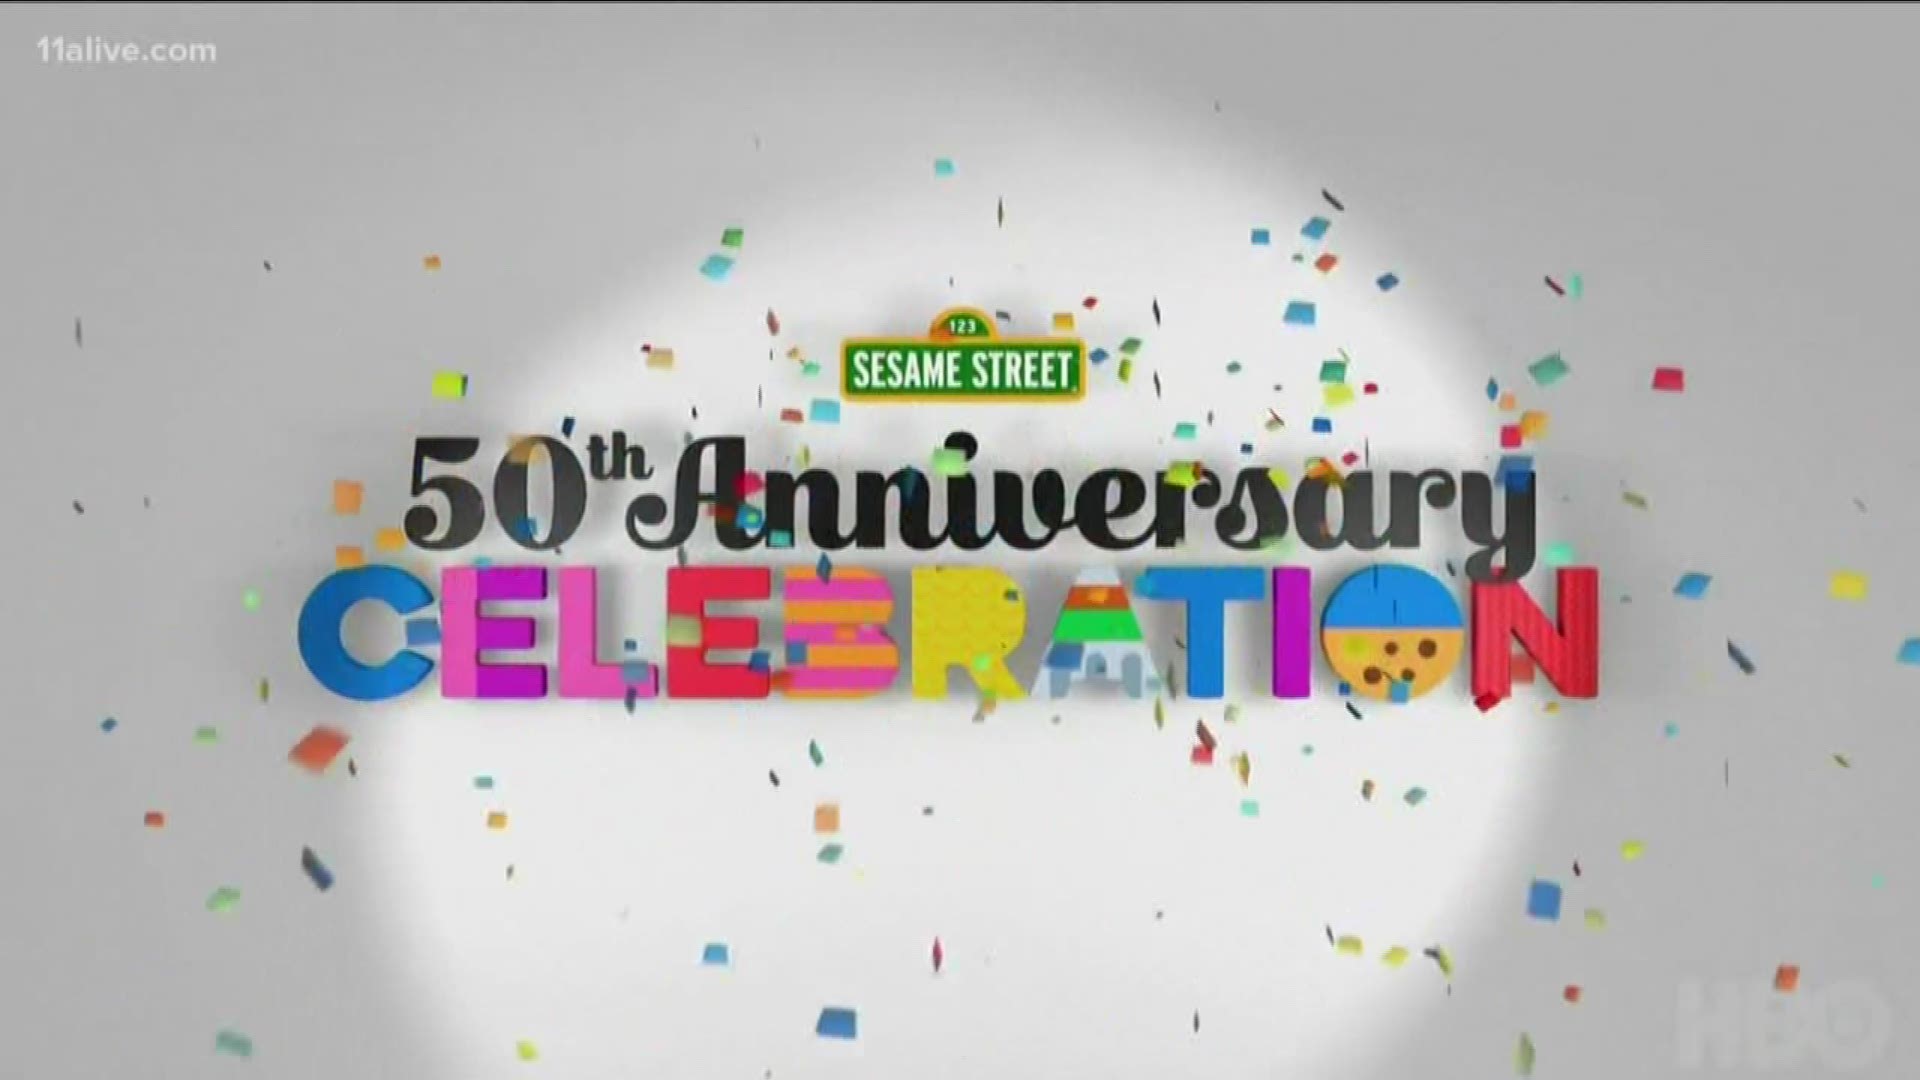 The children's program is celebrating its 50th anniversary, as it continues to be an enduring educational influence.